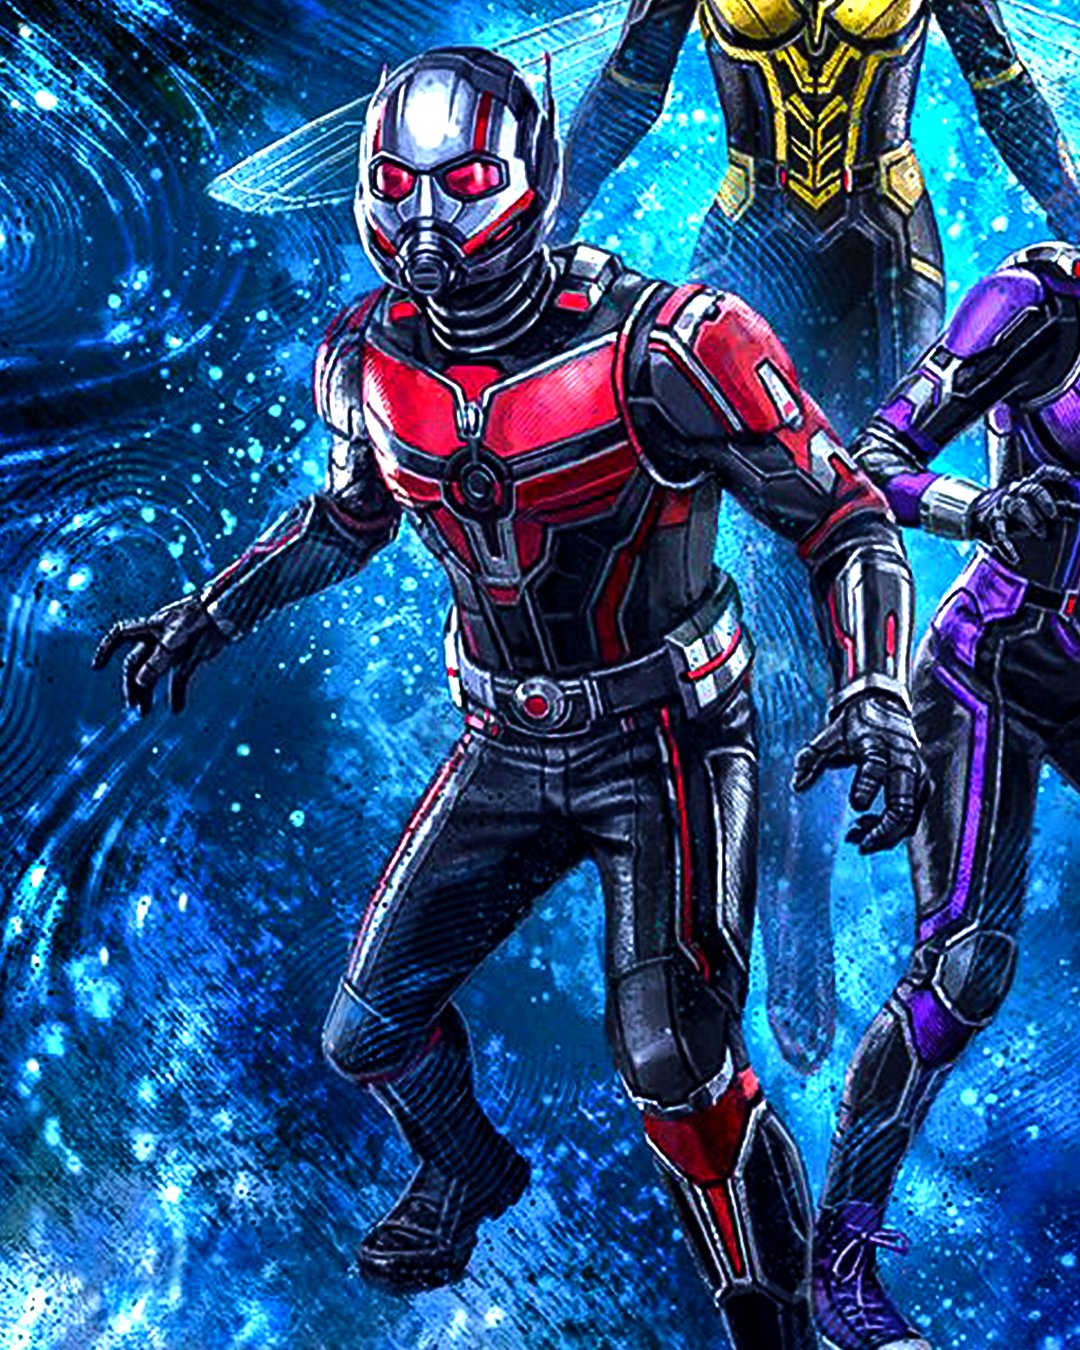 MCU Direct First Look At #AntMan & Wasp's New Suits In ANT MAN AND THE WASP: QUANTUMANIA! Details